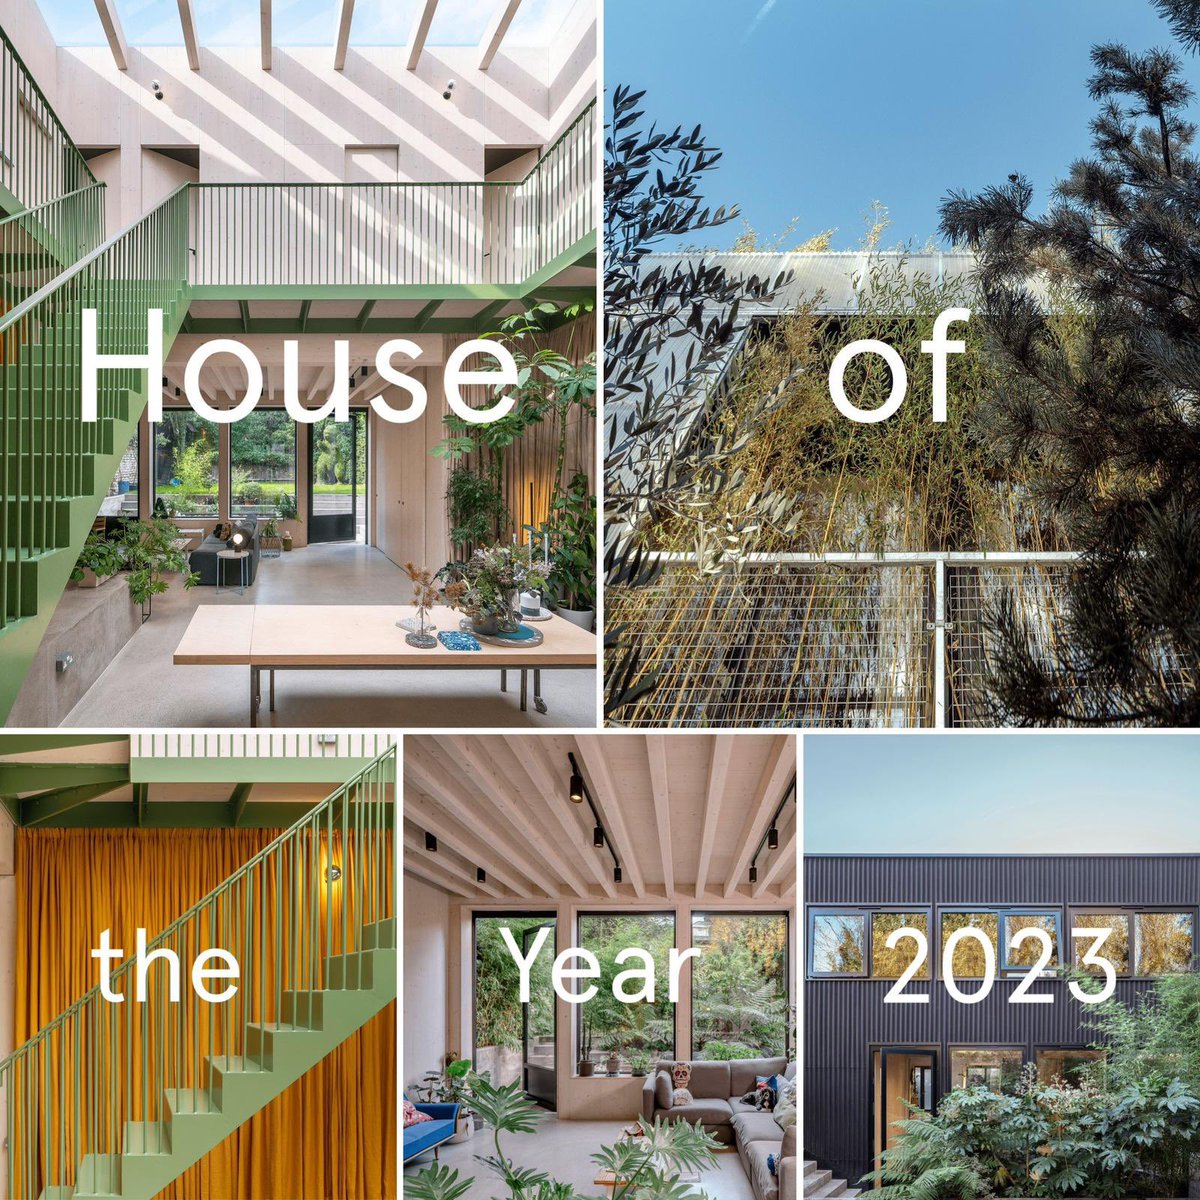 Totally over the moon that #greenhouse has @RIBA House of the Year 2023. The prestigious award given annually to the UK’s best new architect-designed home. It is a fun-filled, super-eco, pretty-pop home on a low budget. The judges said it is “an extraordinary ordinary house”.